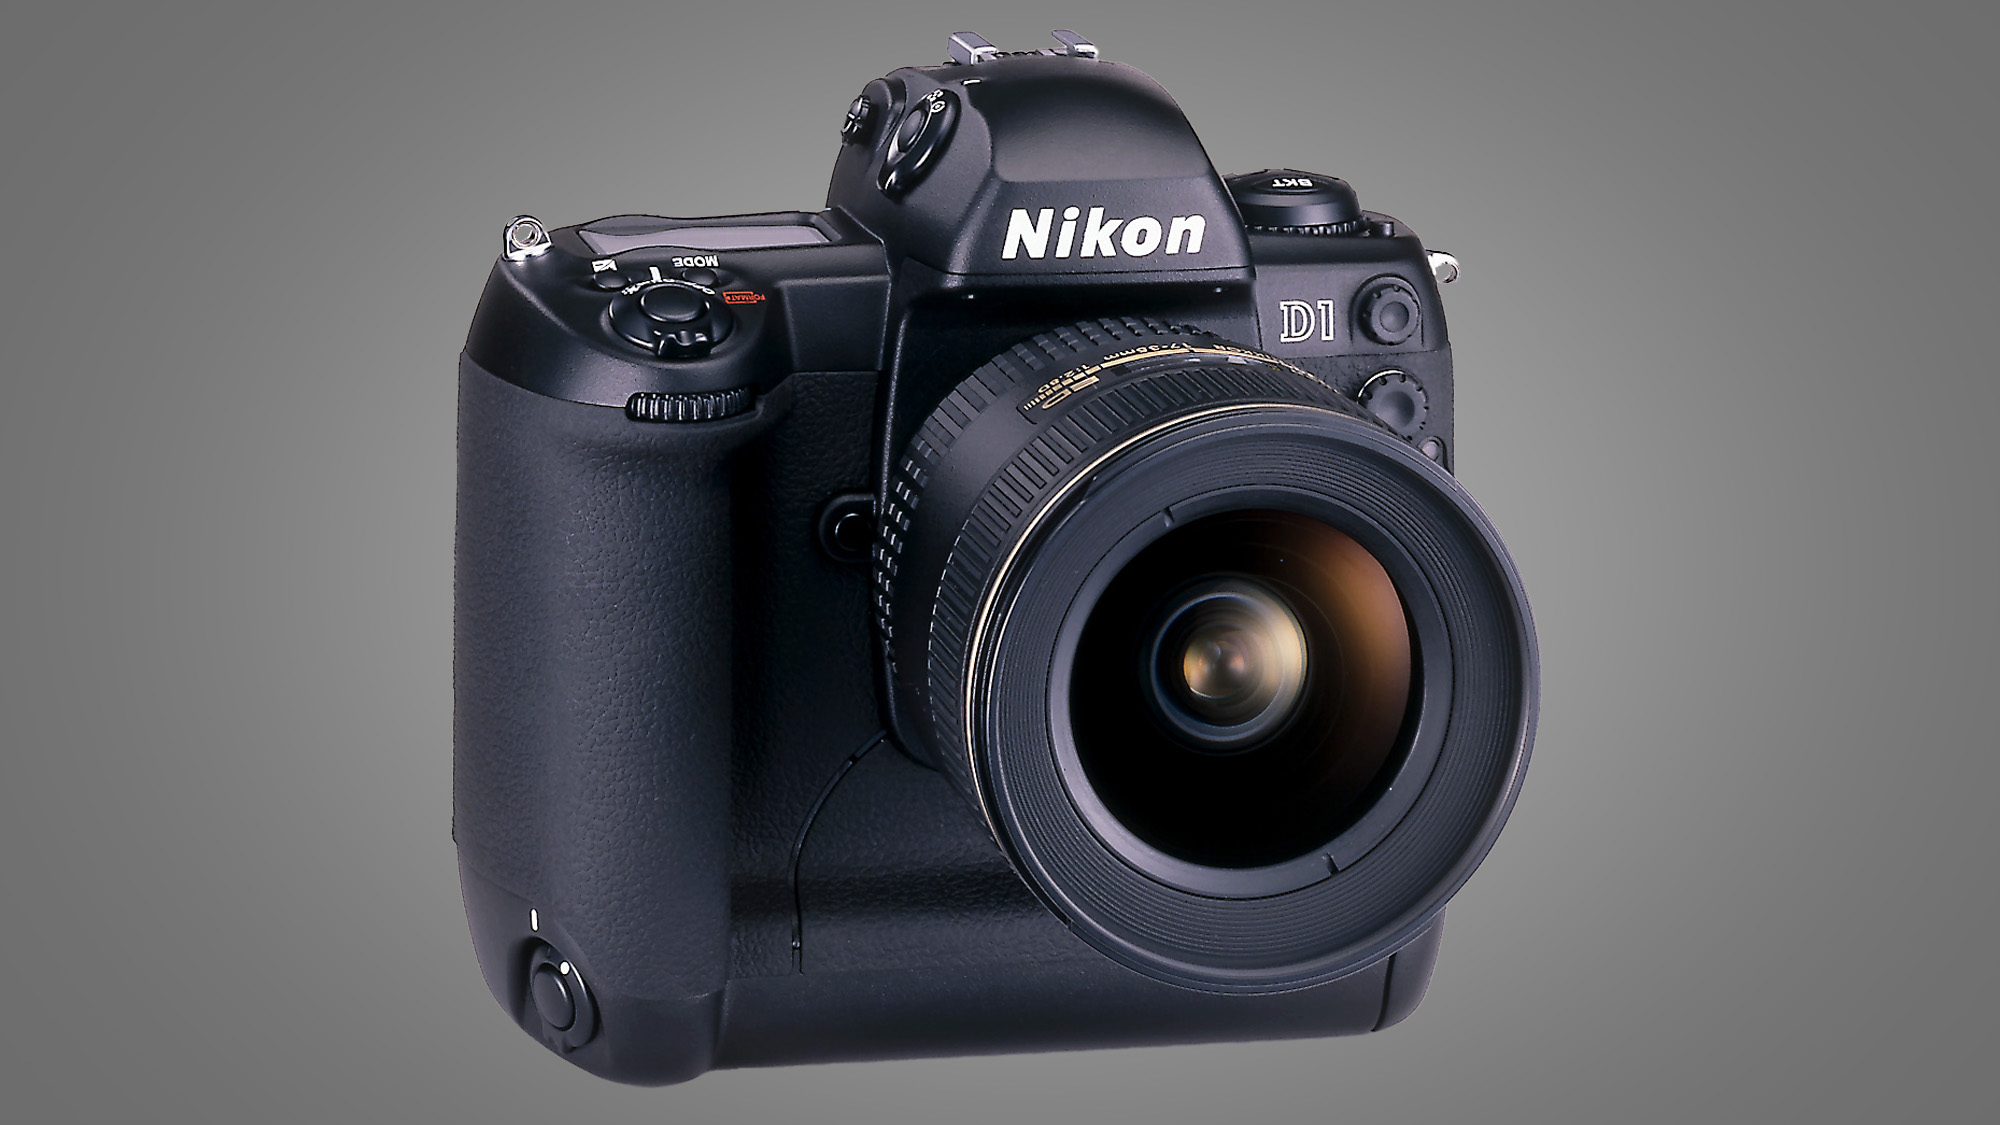 The Nikon D1 camera on a grey background